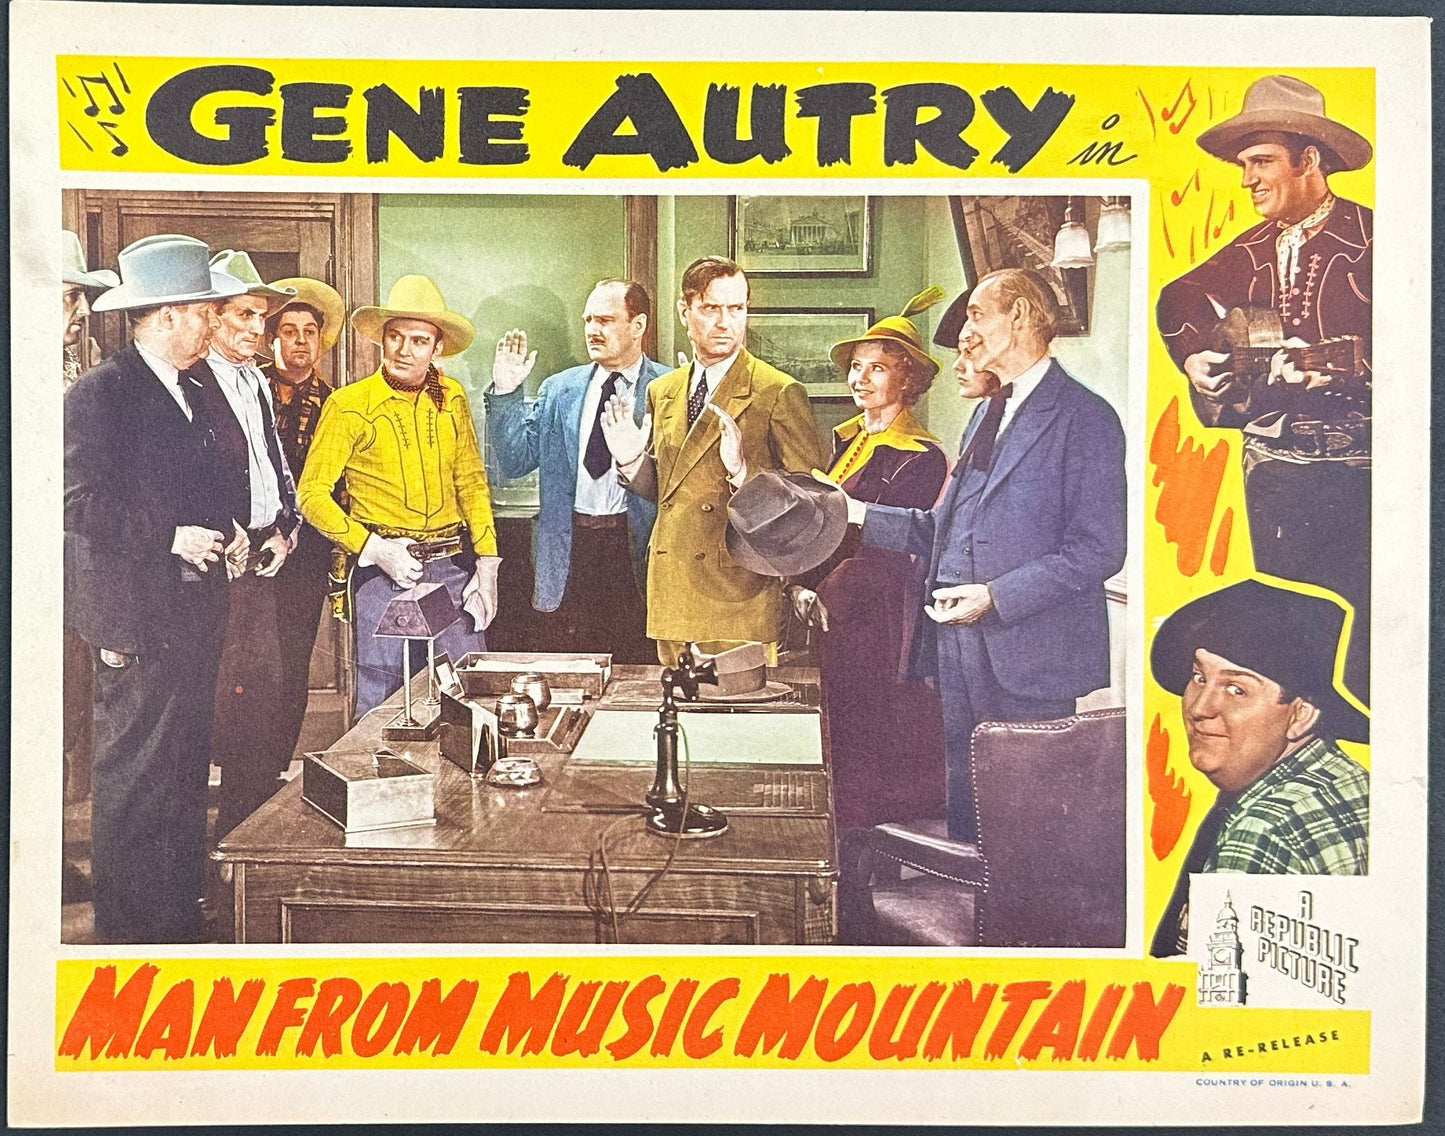 Man From Music Mountain US Complete Lobby Card Set (R 1945) - posterpalace.com